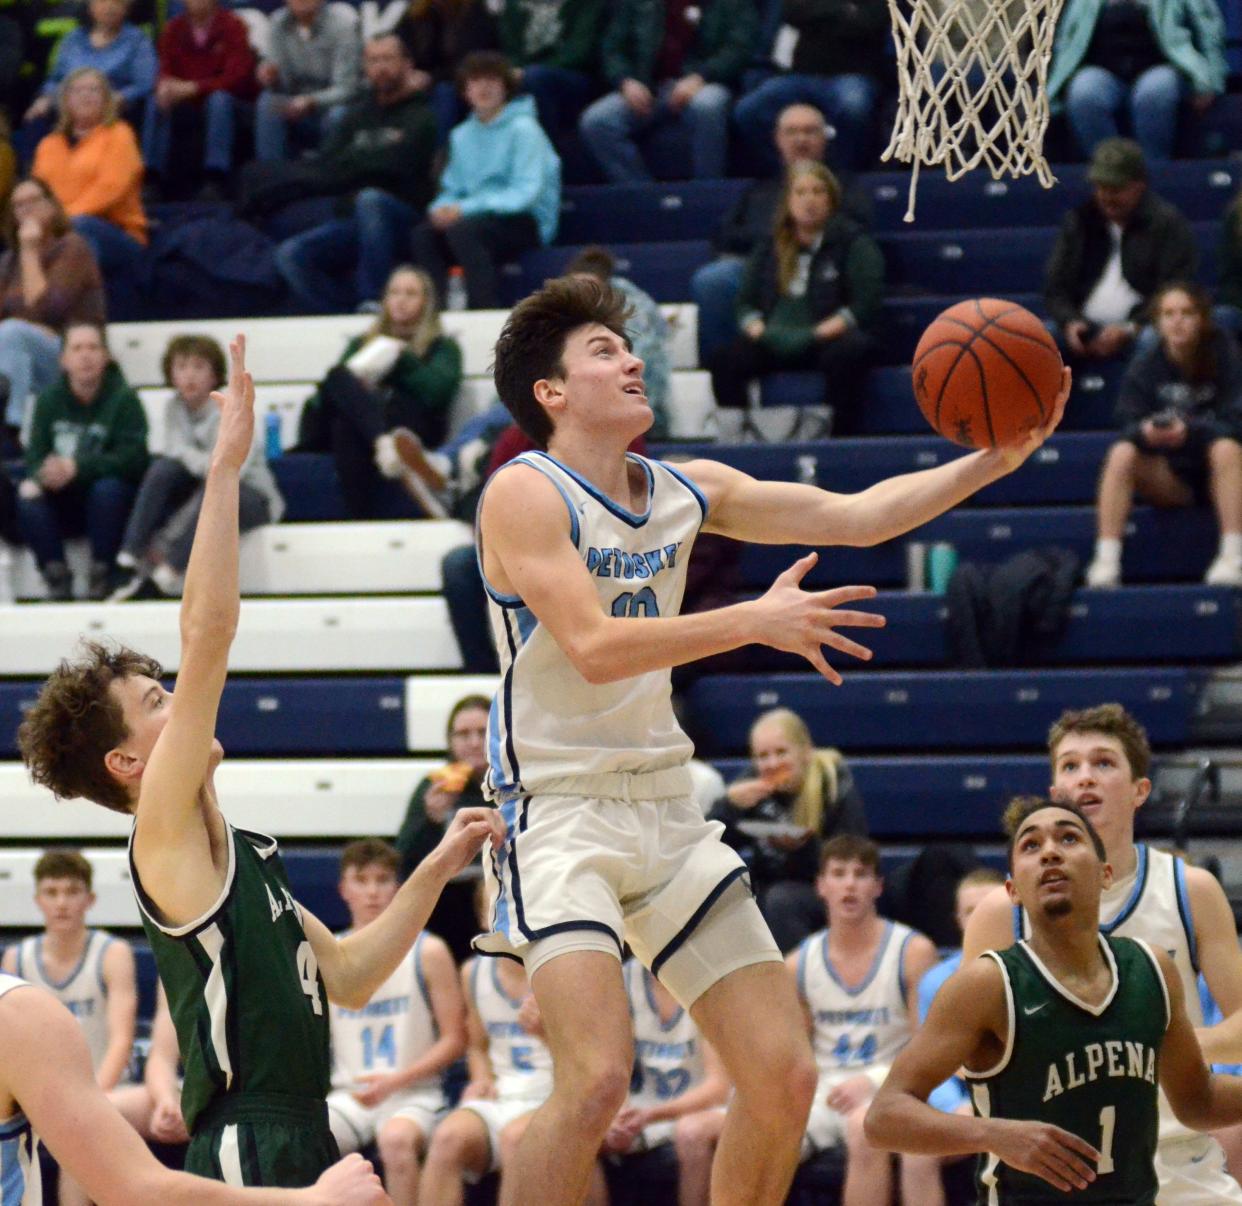 Petoskey's Jimmy Marshall drives and scores through the Alpena defense during the start of the second half against the Wildcats Friday.